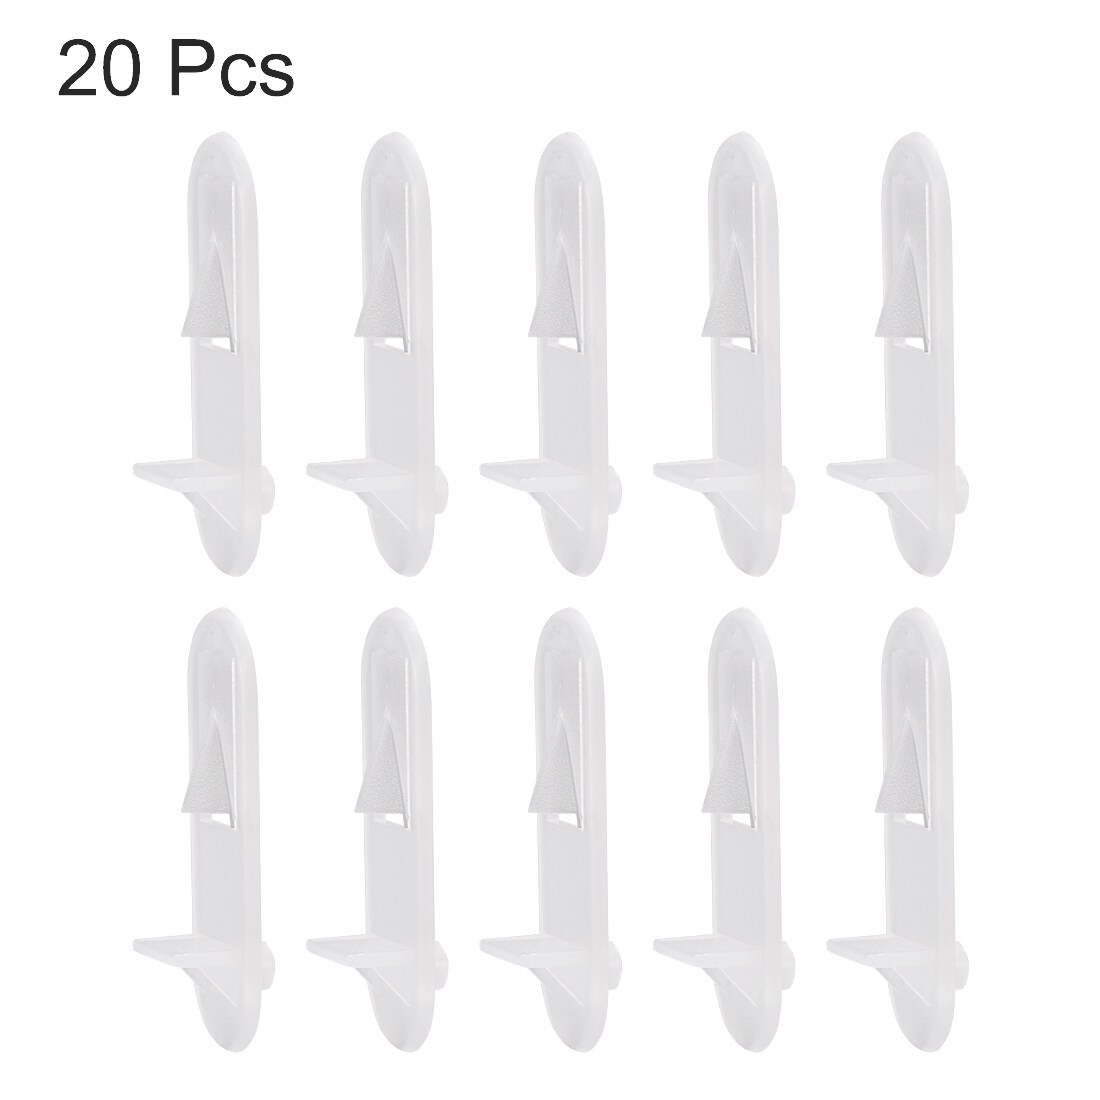 20 Pieces 3 mm Shelf Pins Clear Support Pegs Cabinet Shelf Pegs